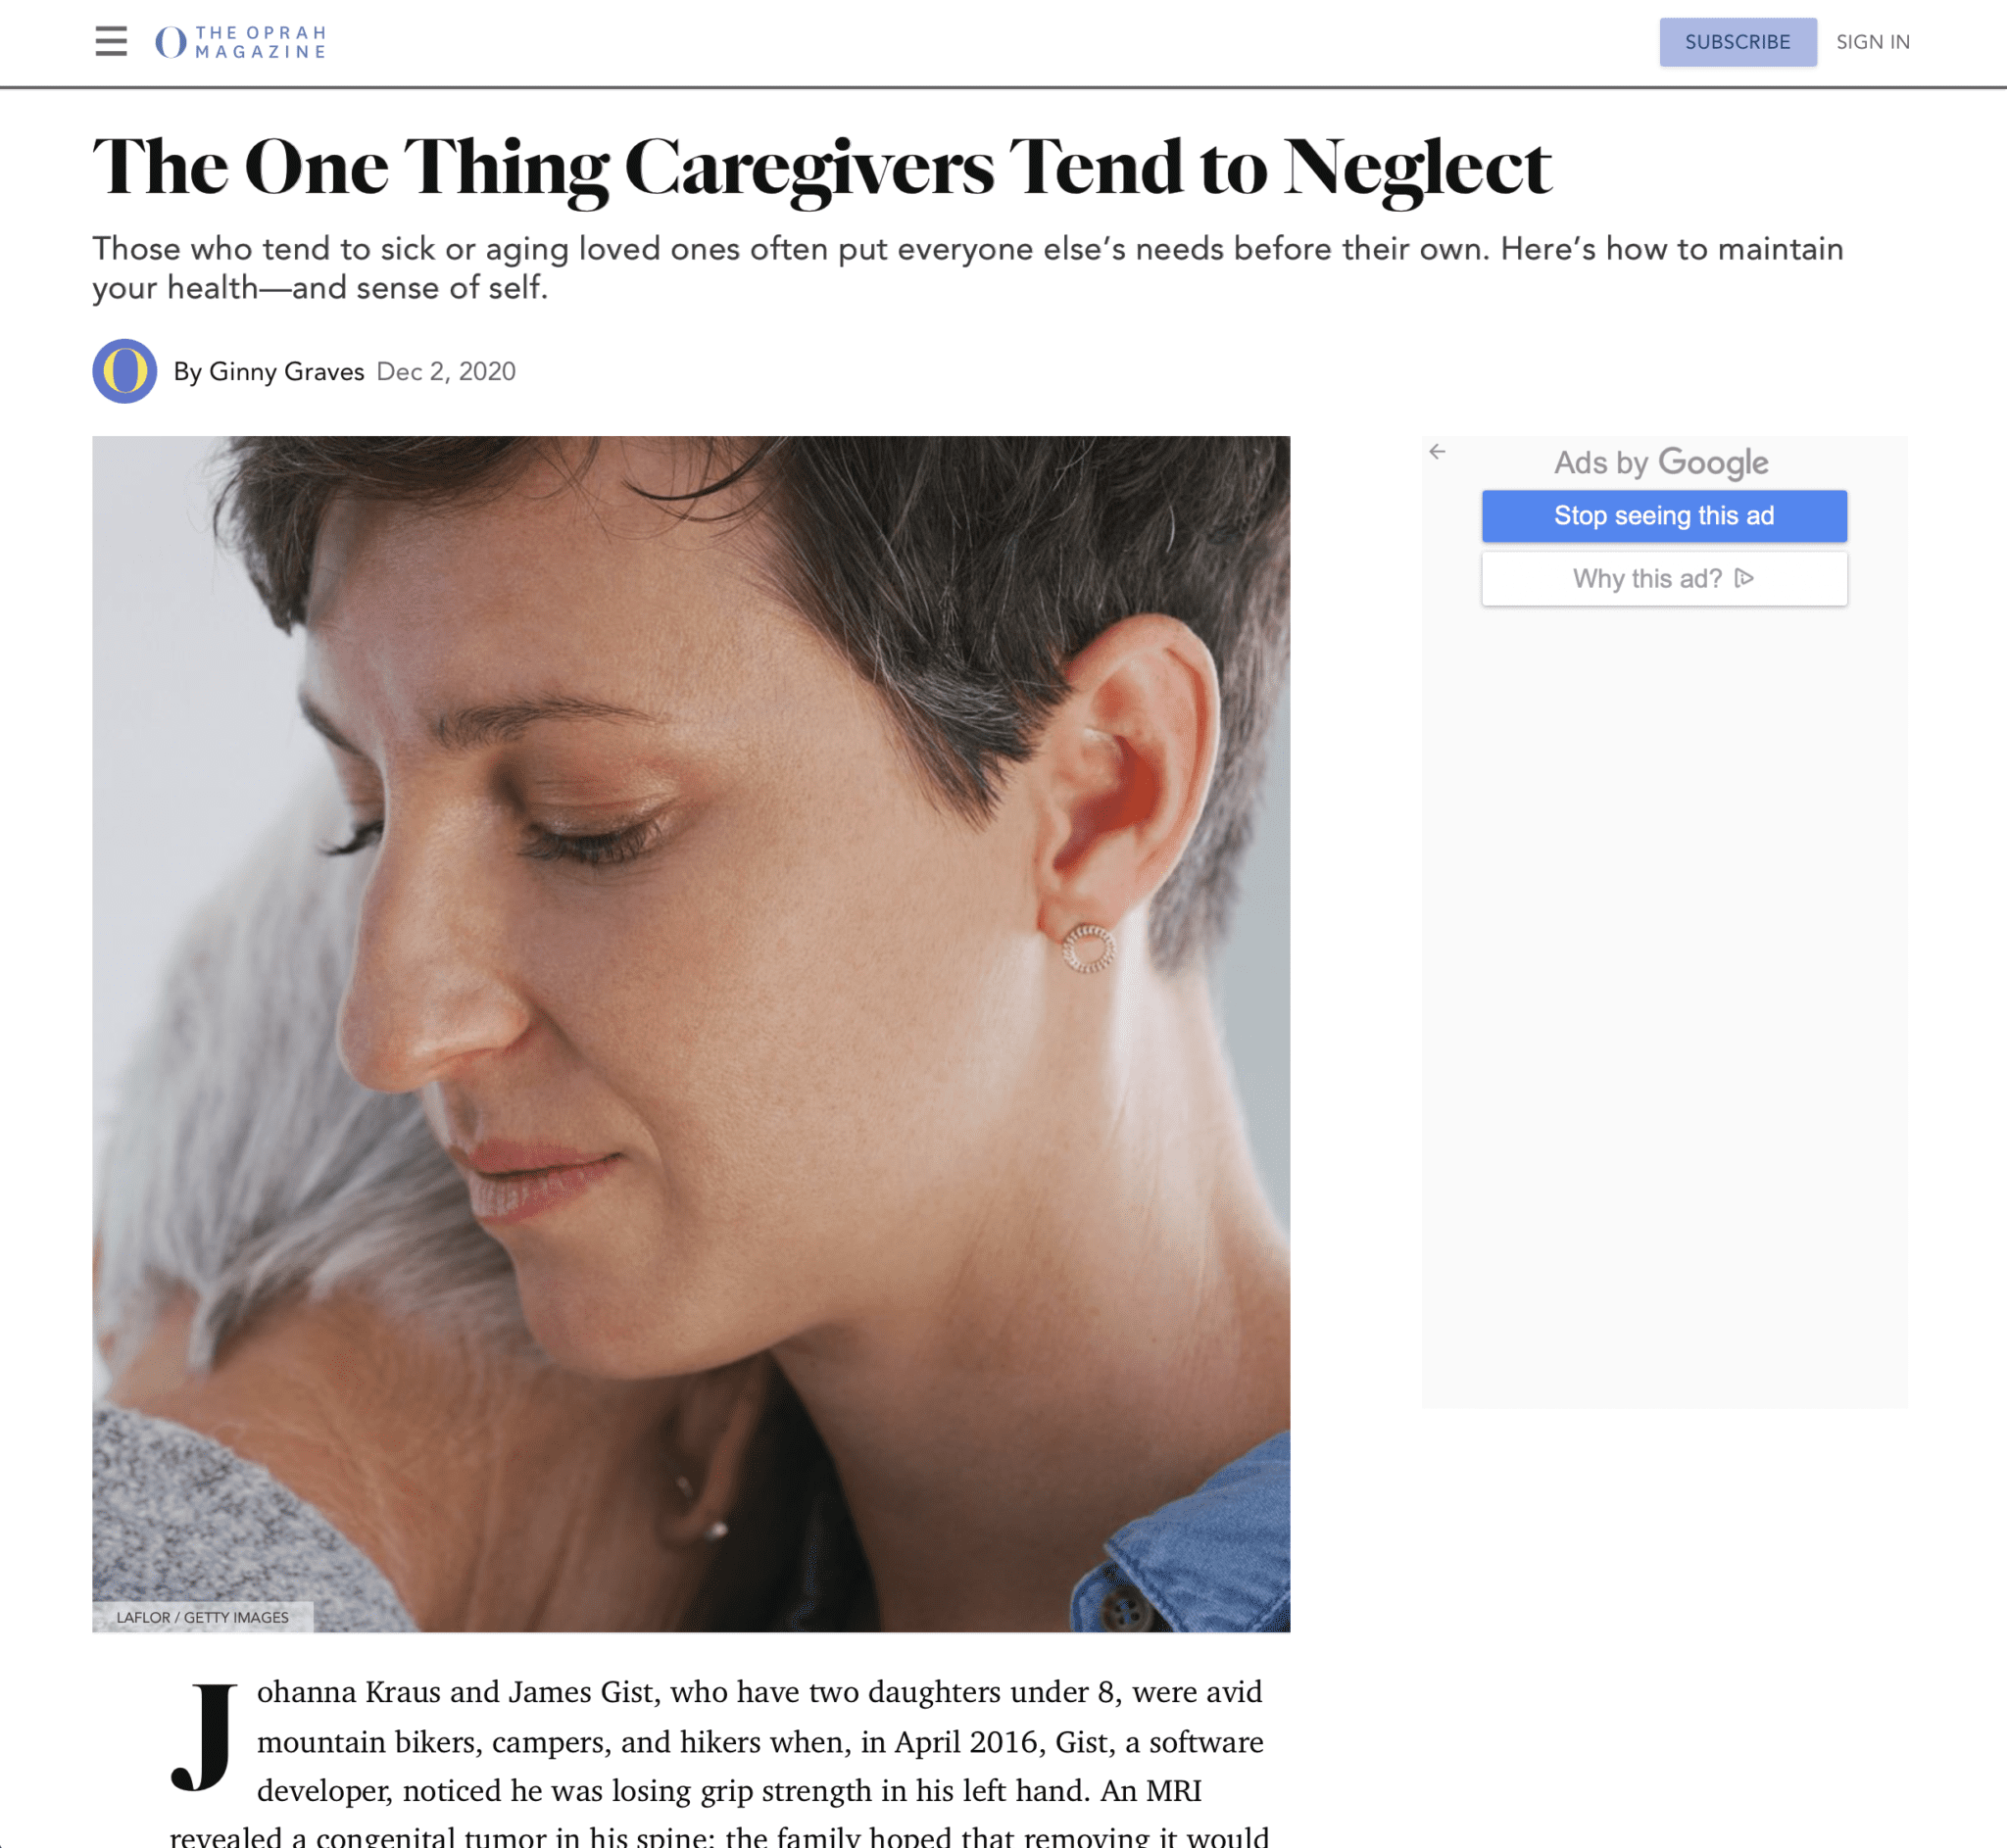 Oprah Magazine | The One Thing Caregivers Tend to Neglect